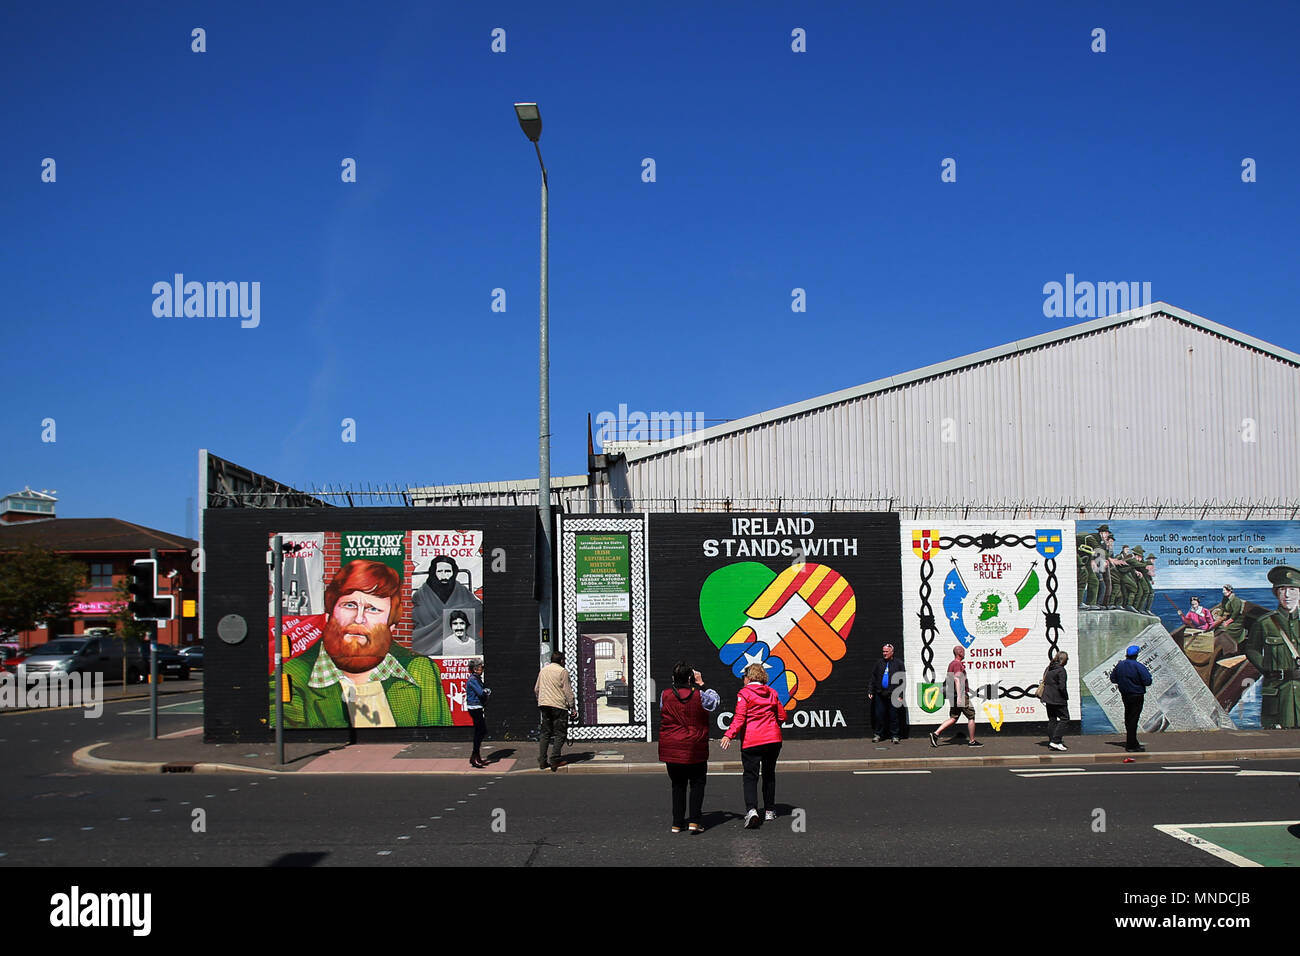 Tourist visit the Falls Road, west Belfast, May 2018. The Falls Road (from Irish túath na bhFál, meaning 'territory of the enclosures) is the main road through west Belfast, Northern Ireland, running from Divis Street in Belfast city centre to Andersonstown in the suburbs. Its name is synonymous with the republican community in the city, whilst the neighbouring Shankill Road is predominantly loyalist, separated from the Falls Road by peace lines. The road is usually referred to as the Falls Road, rather than as Falls Road. It is known as the Faas Raa in Ulster-Scots.[ Photo/Paul McErlane Stock Photo